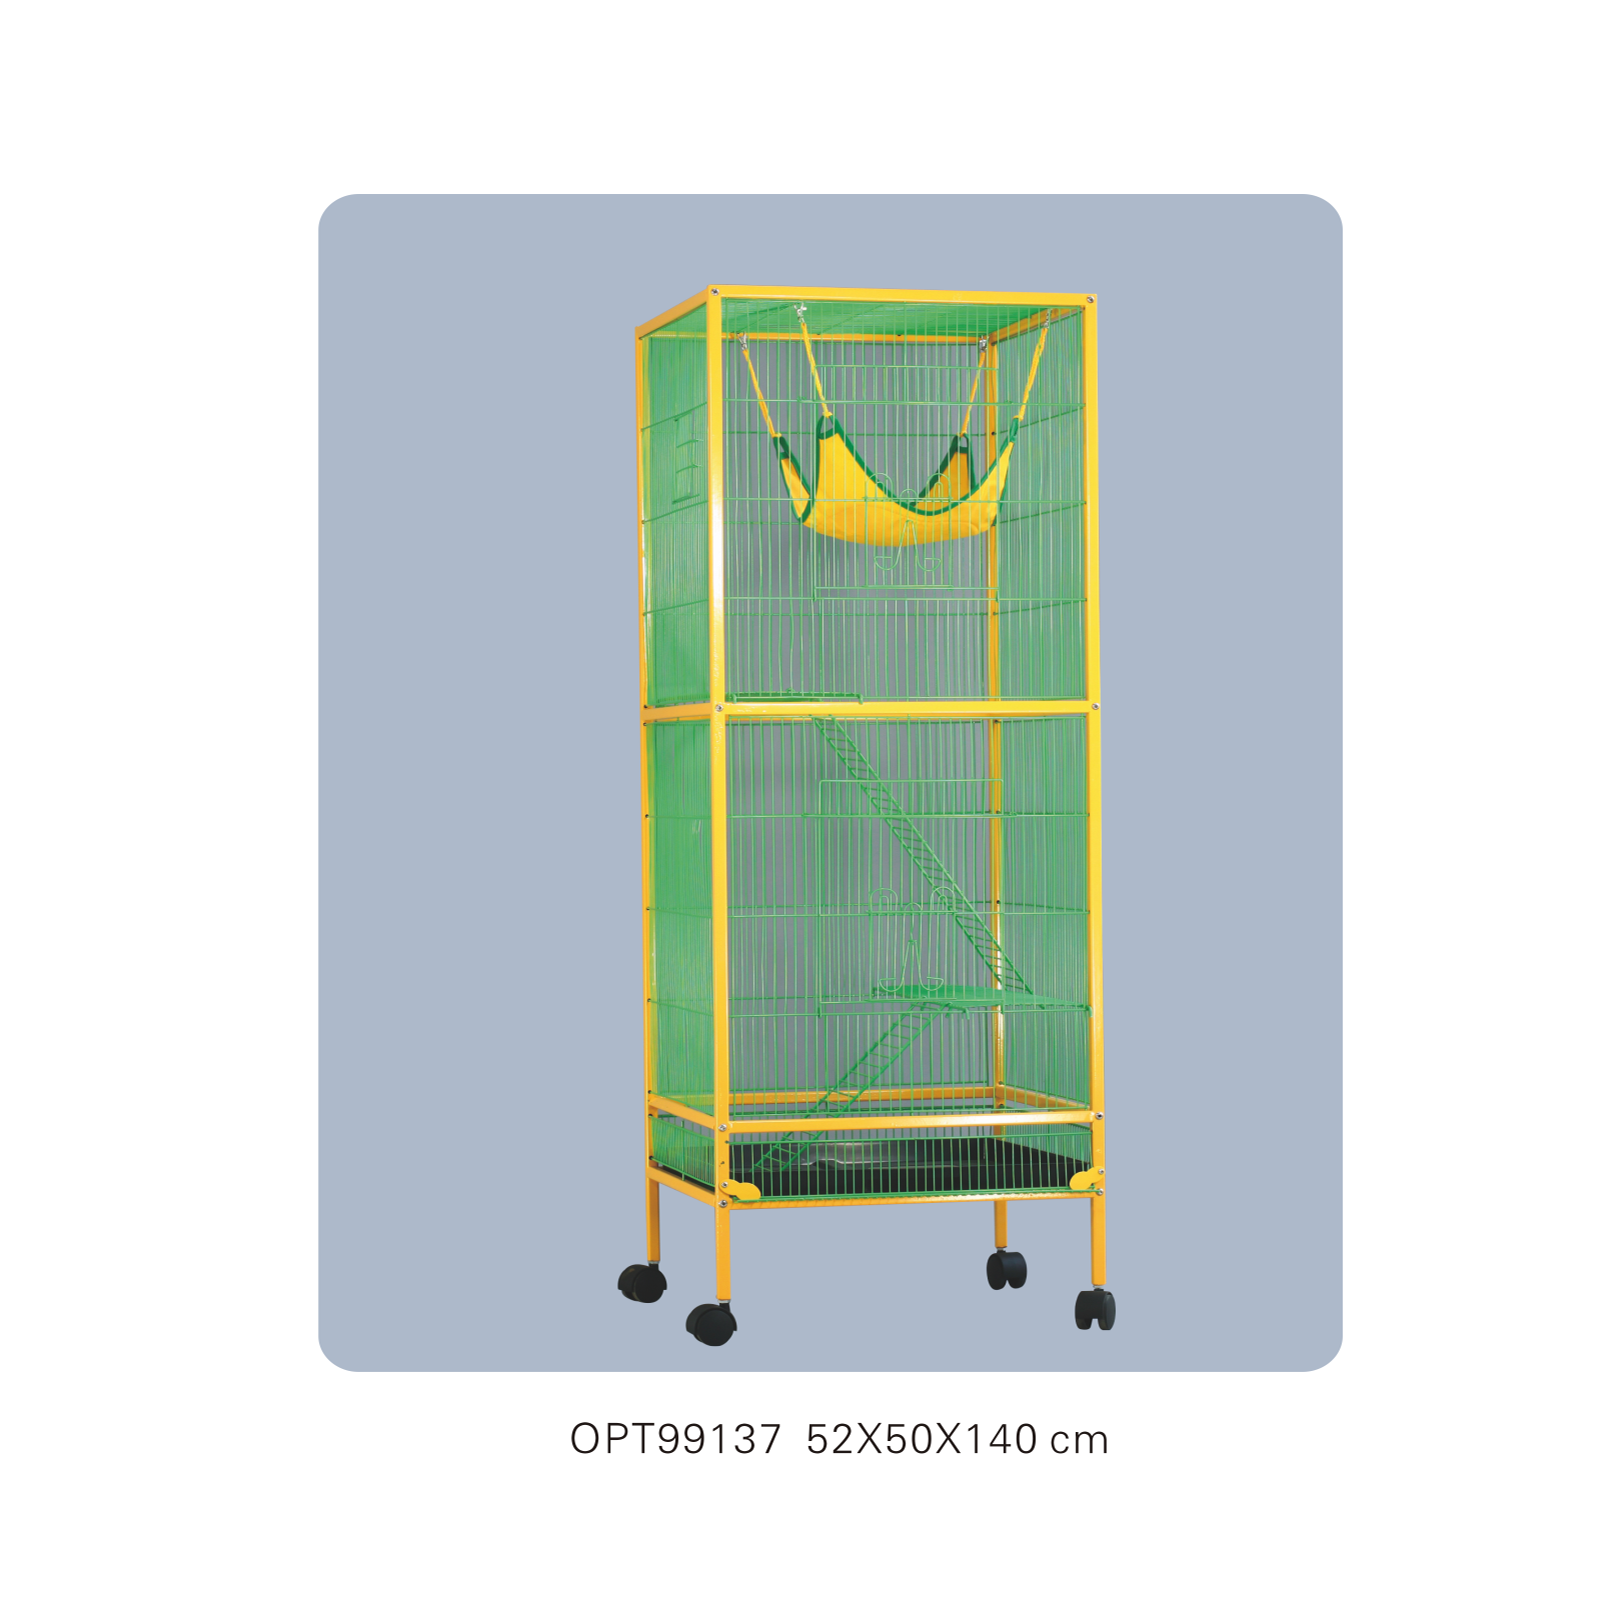 OPT99137 52x50x140cm small animal cages